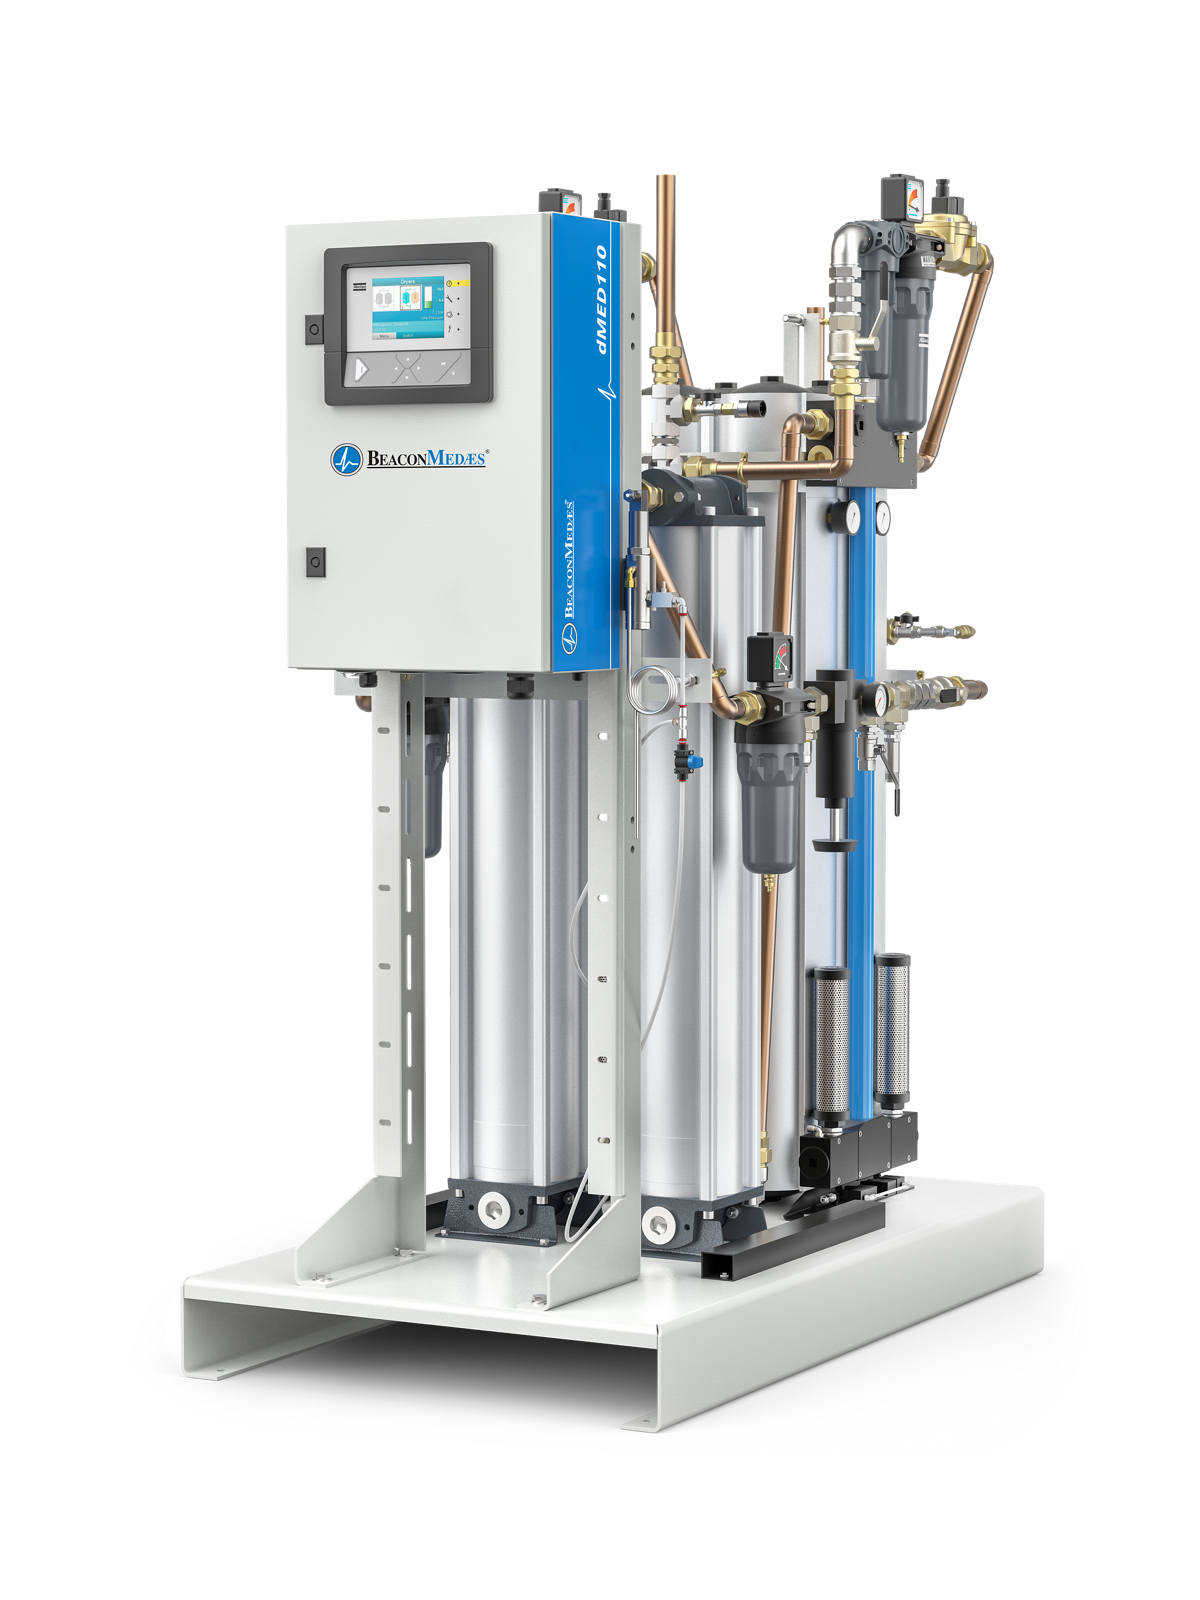 Providers of Medical Desiccant Air Dryers UK